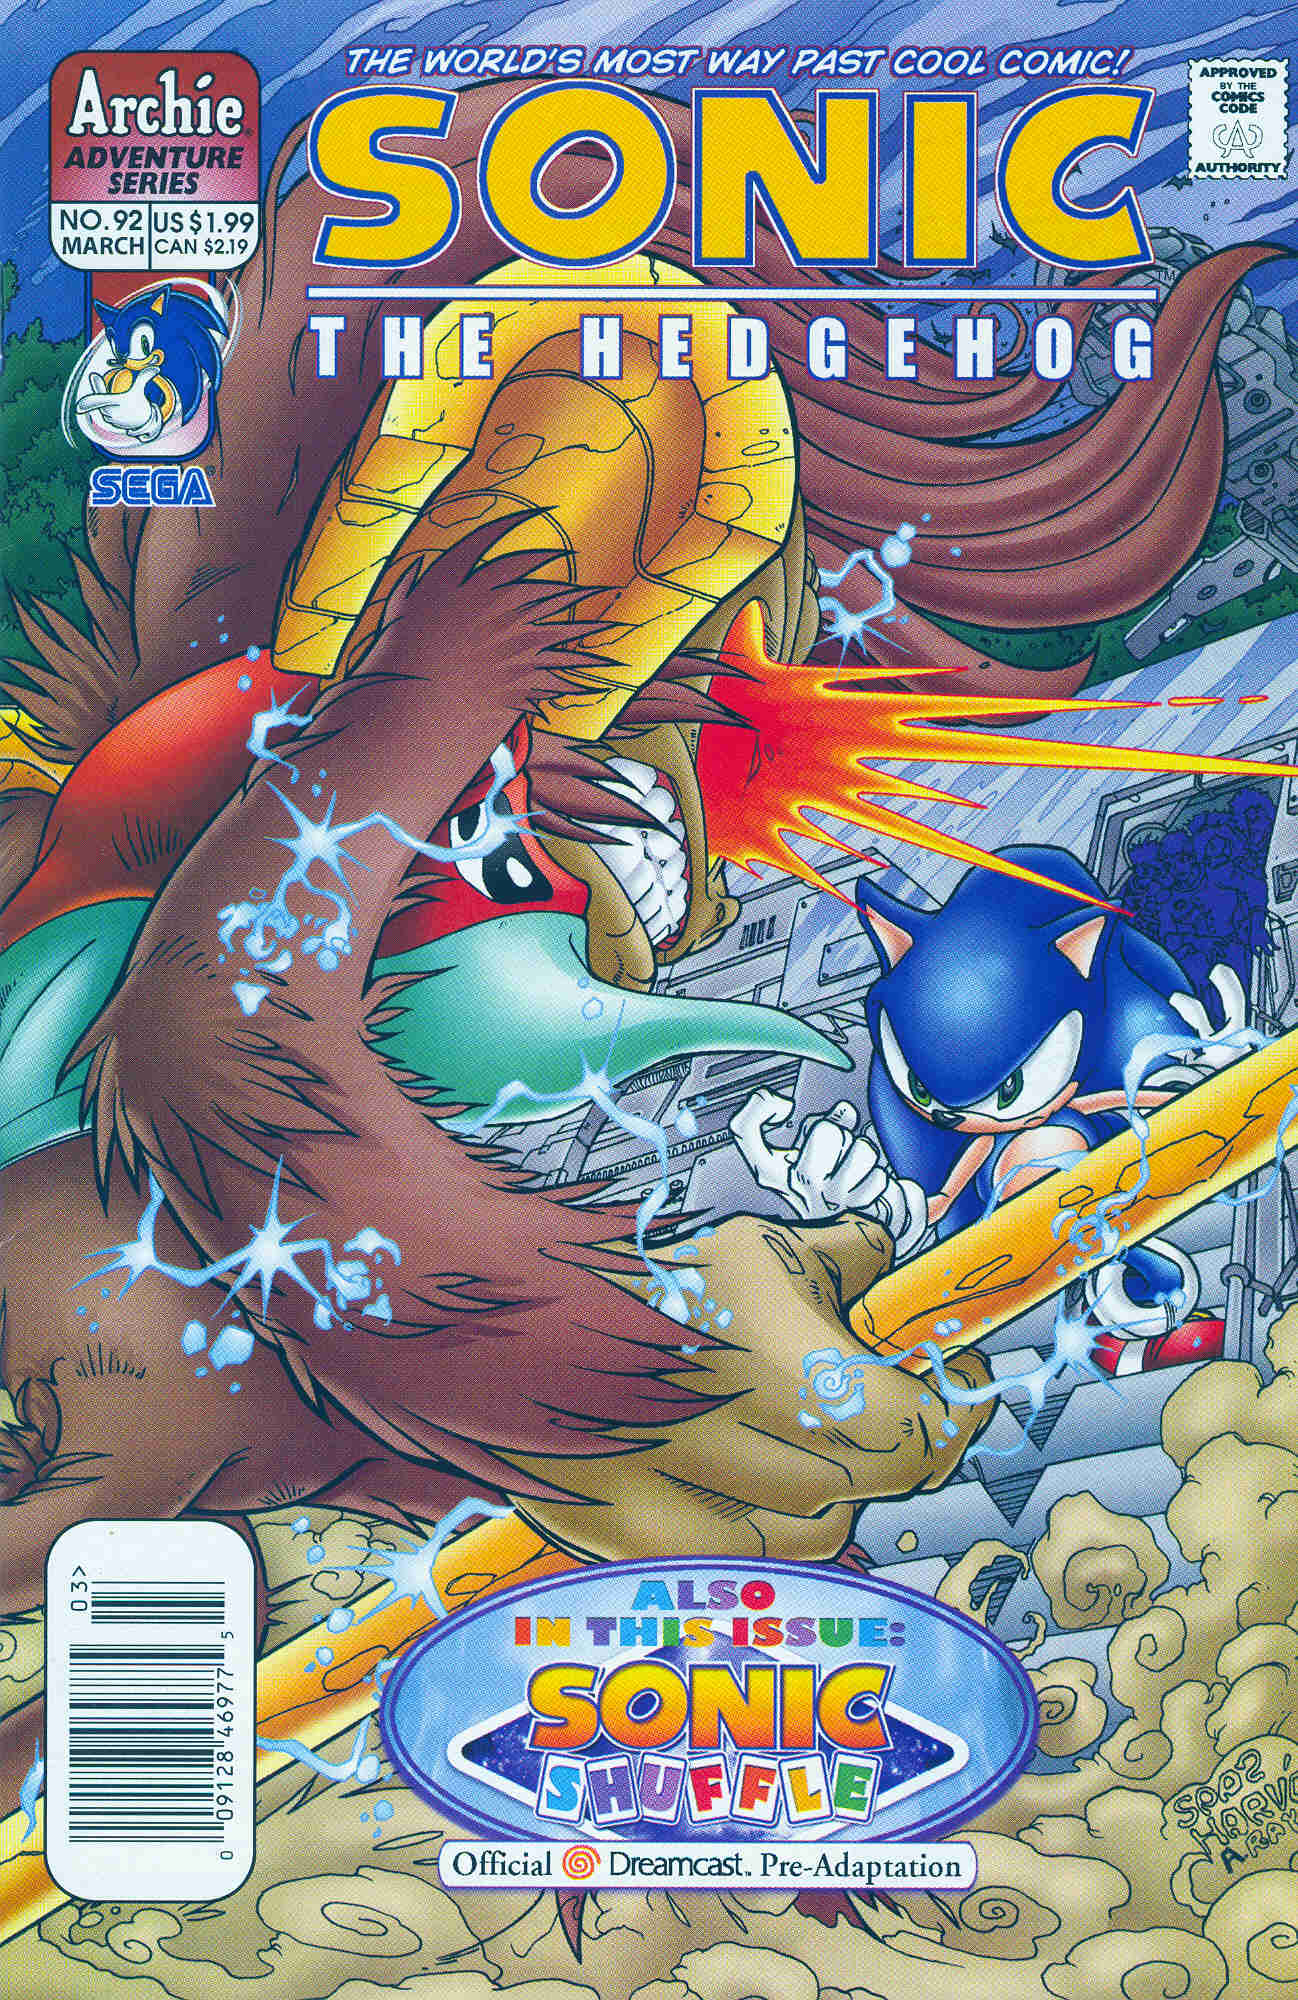 Sonic - Archie Adventure Series March 2001 Comic cover page